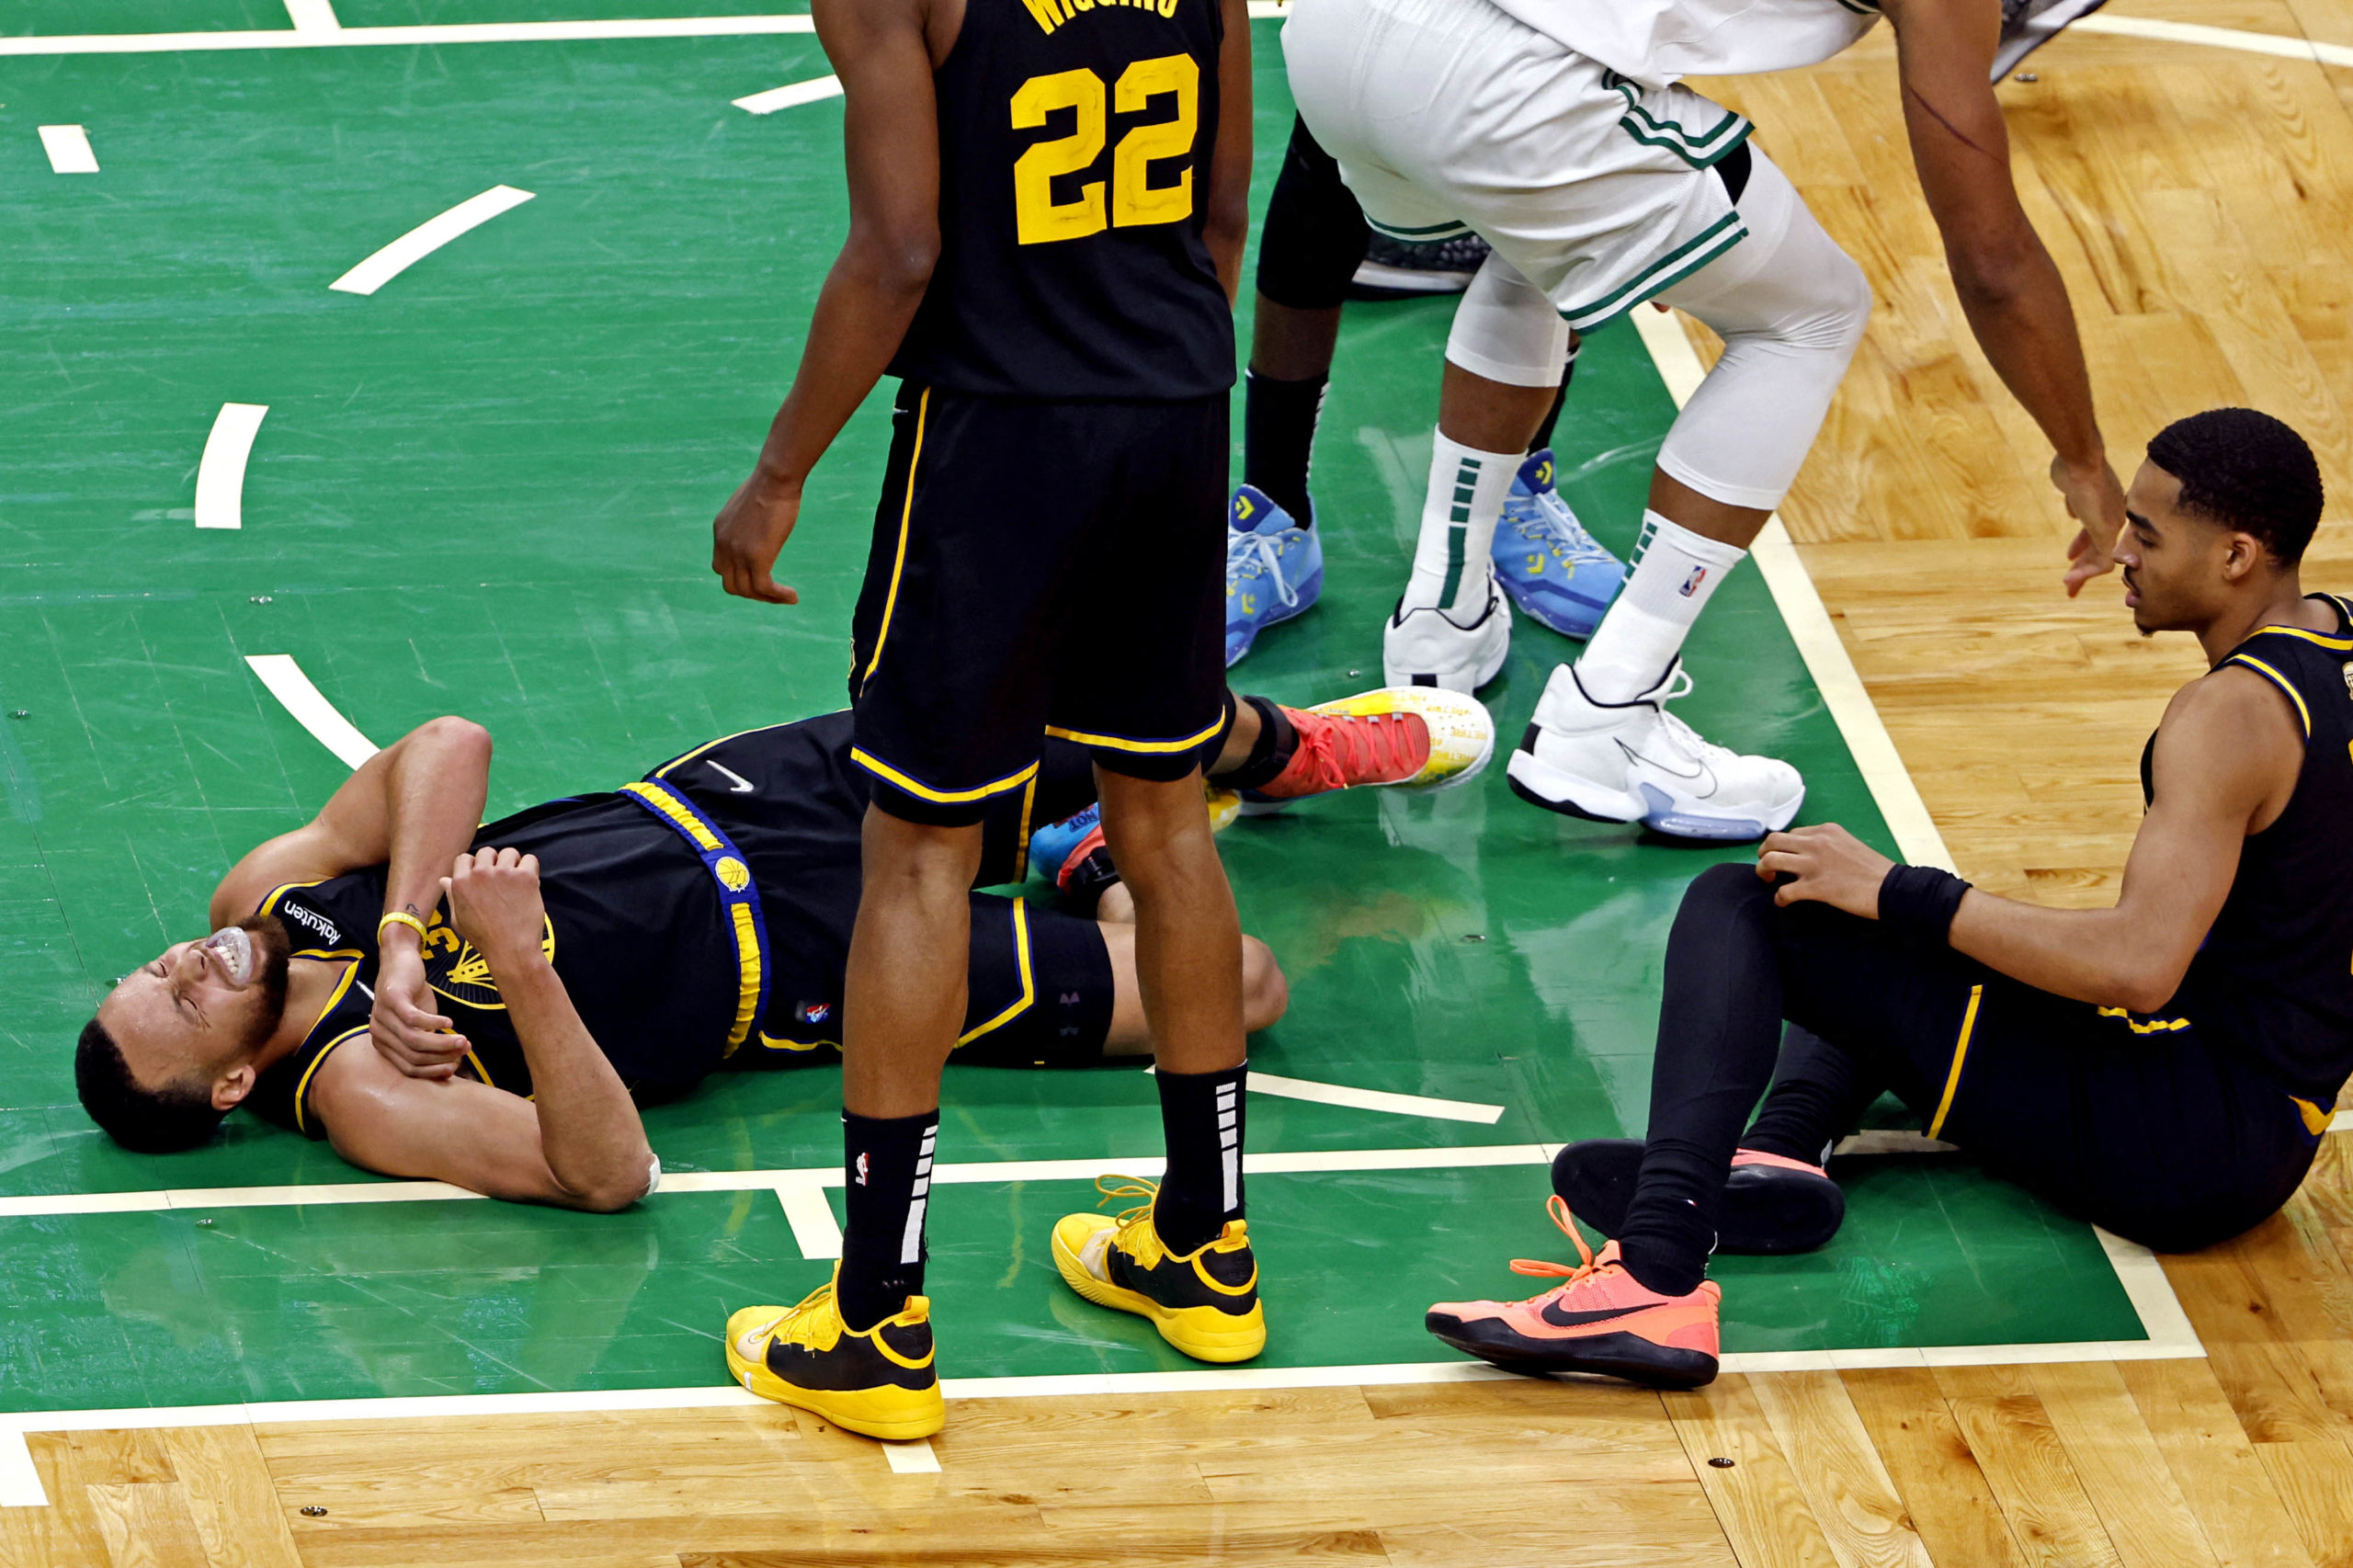 Jun 8, 2022; Boston, Massachusetts, USA; Golden State Warriors guard Stephen Curry (30) reacts to an apparent injury during the fourth quarter against the Boston Celtics in game three of the 2022 NBA Finals at TD Garden. Mandatory Credit: Winslow Townson-USA TODAY Sports